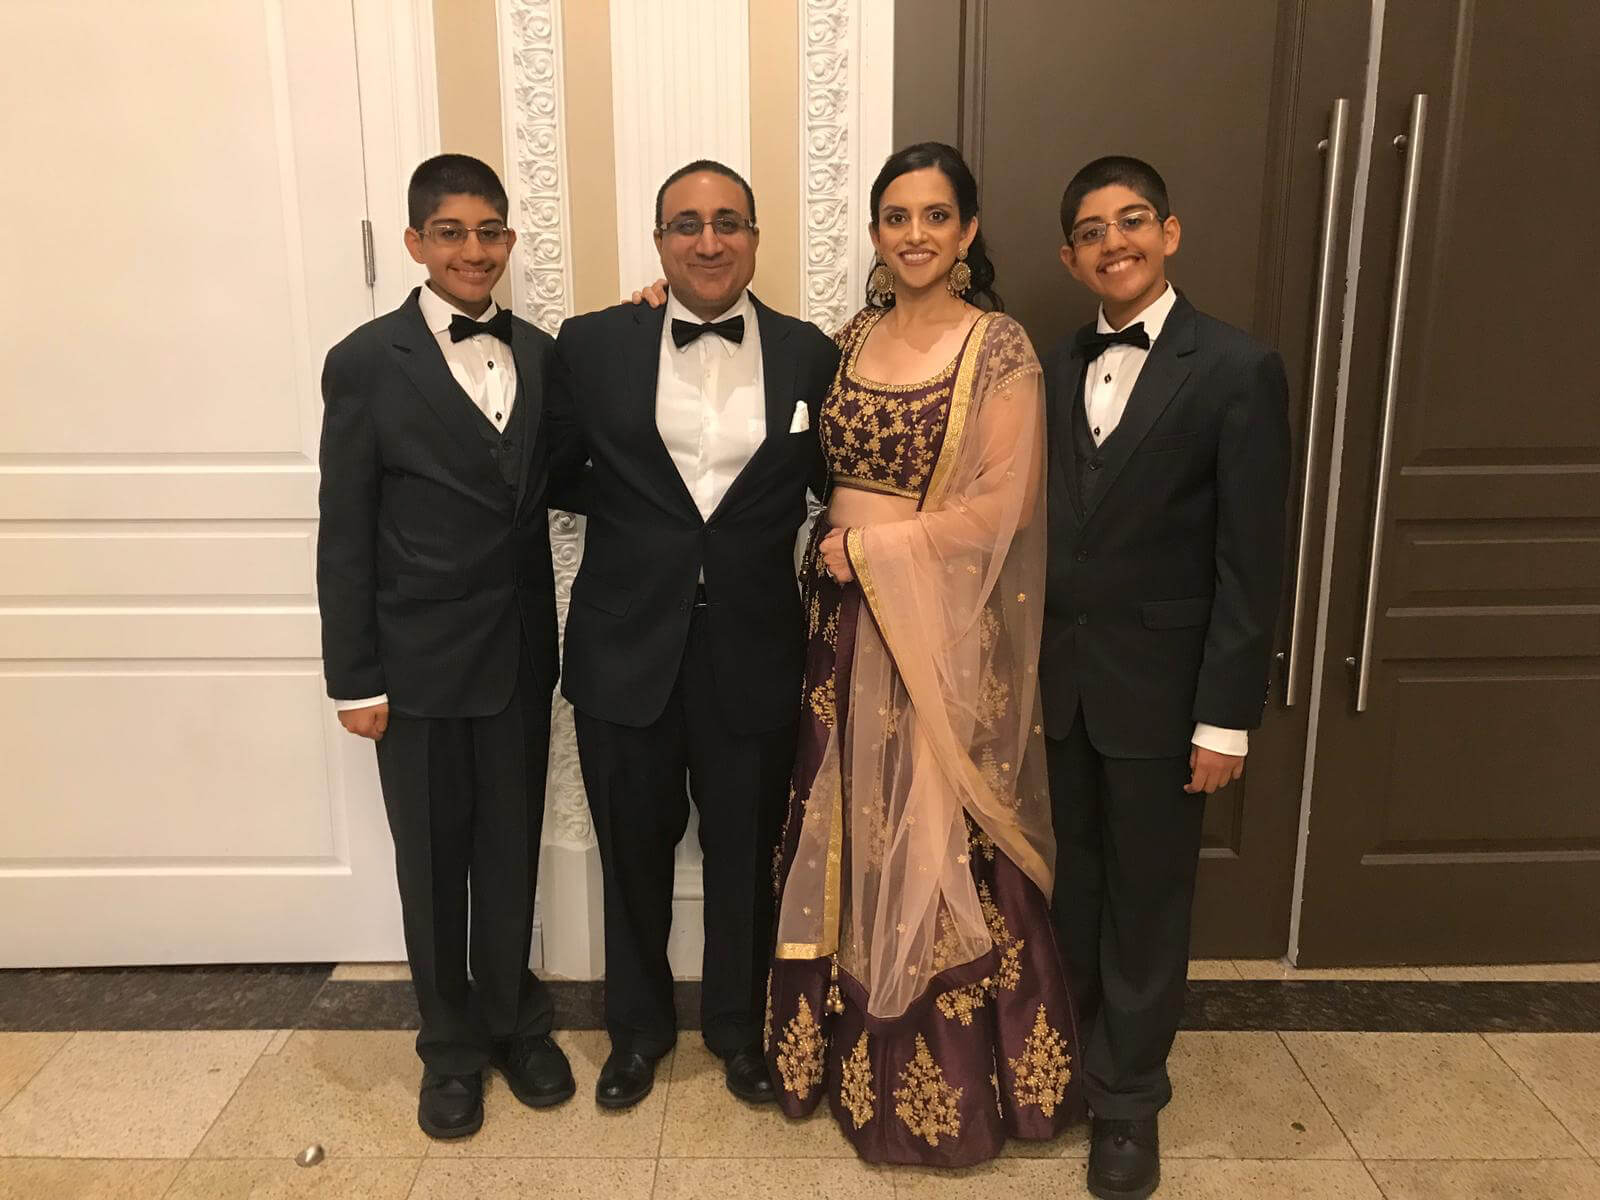 Ranjeet, Parminder, and their sons